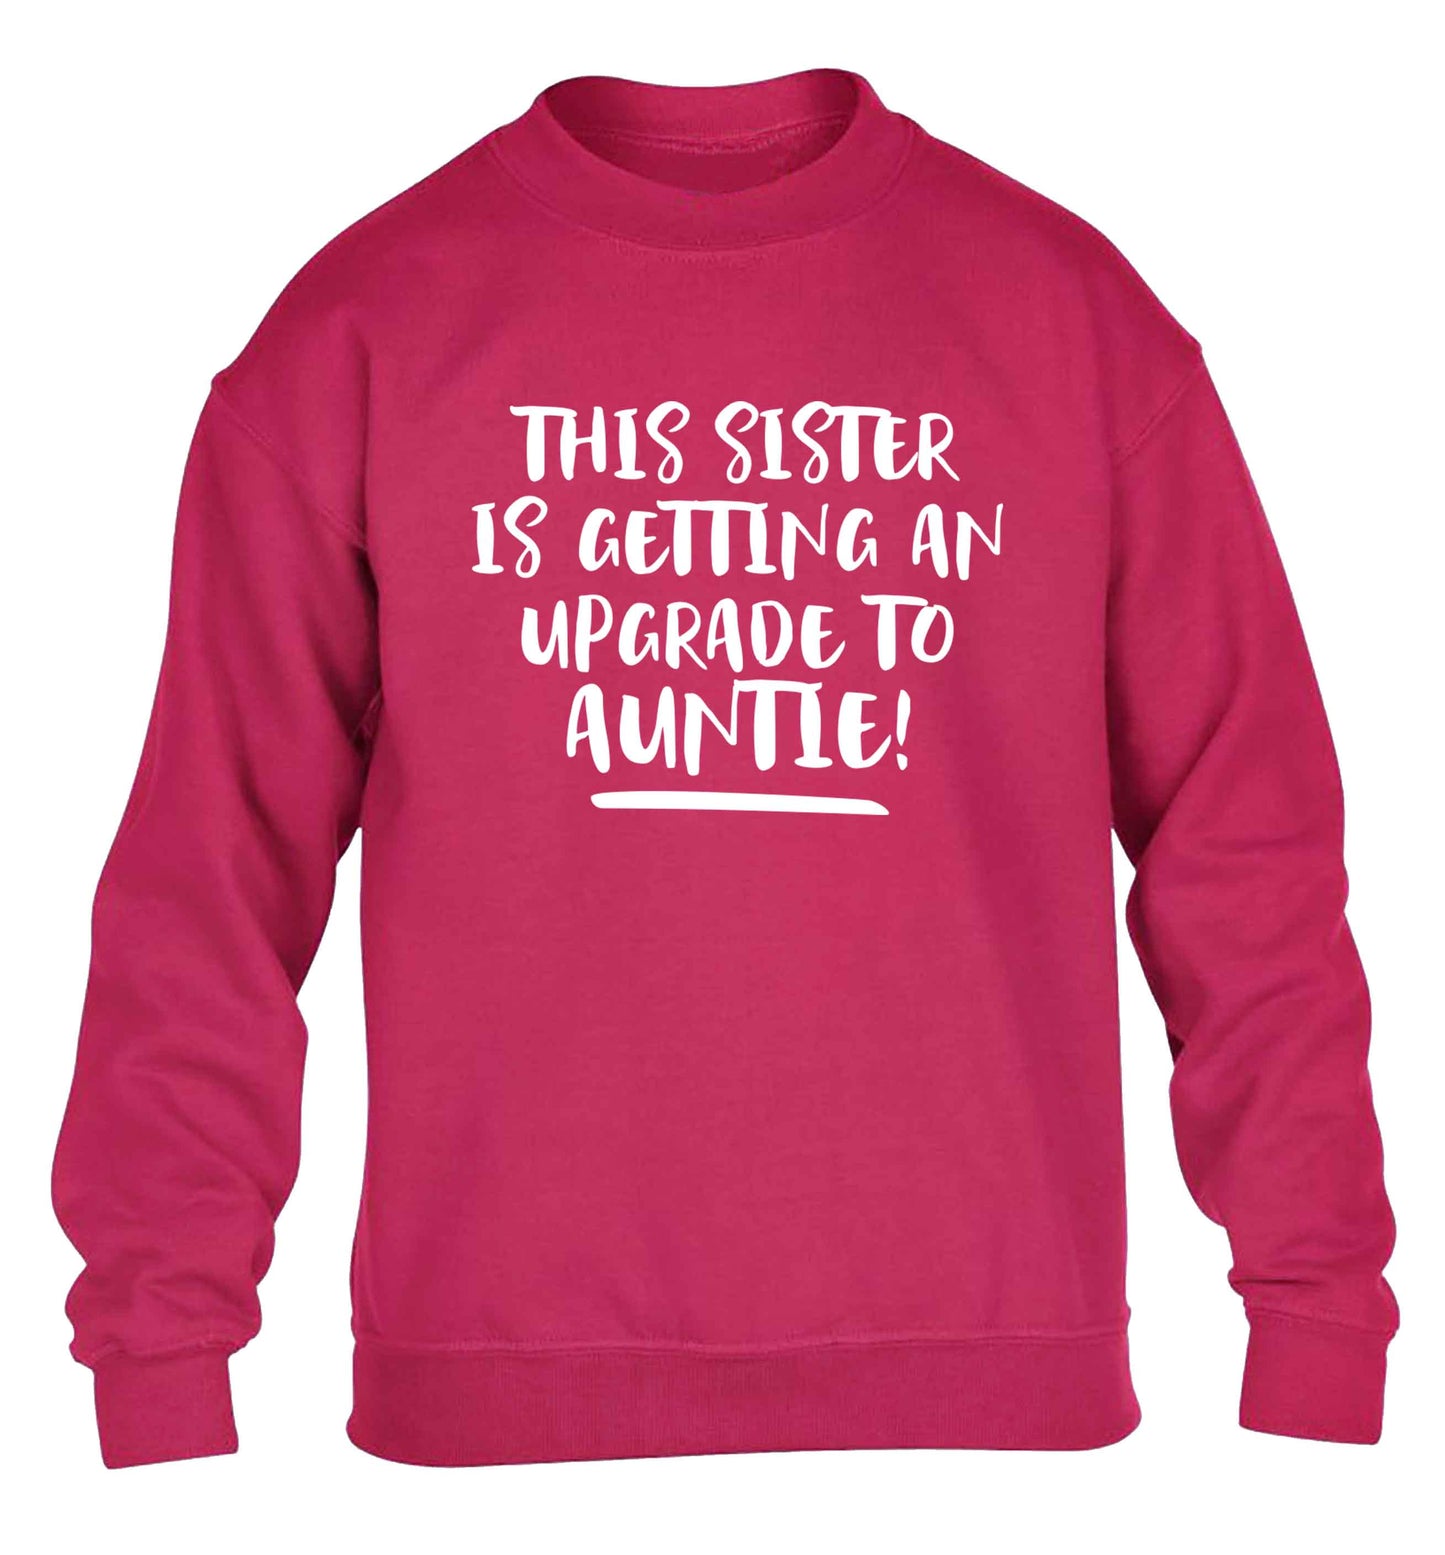 This sister is getting an upgrade to auntie! children's pink sweater 12-13 Years